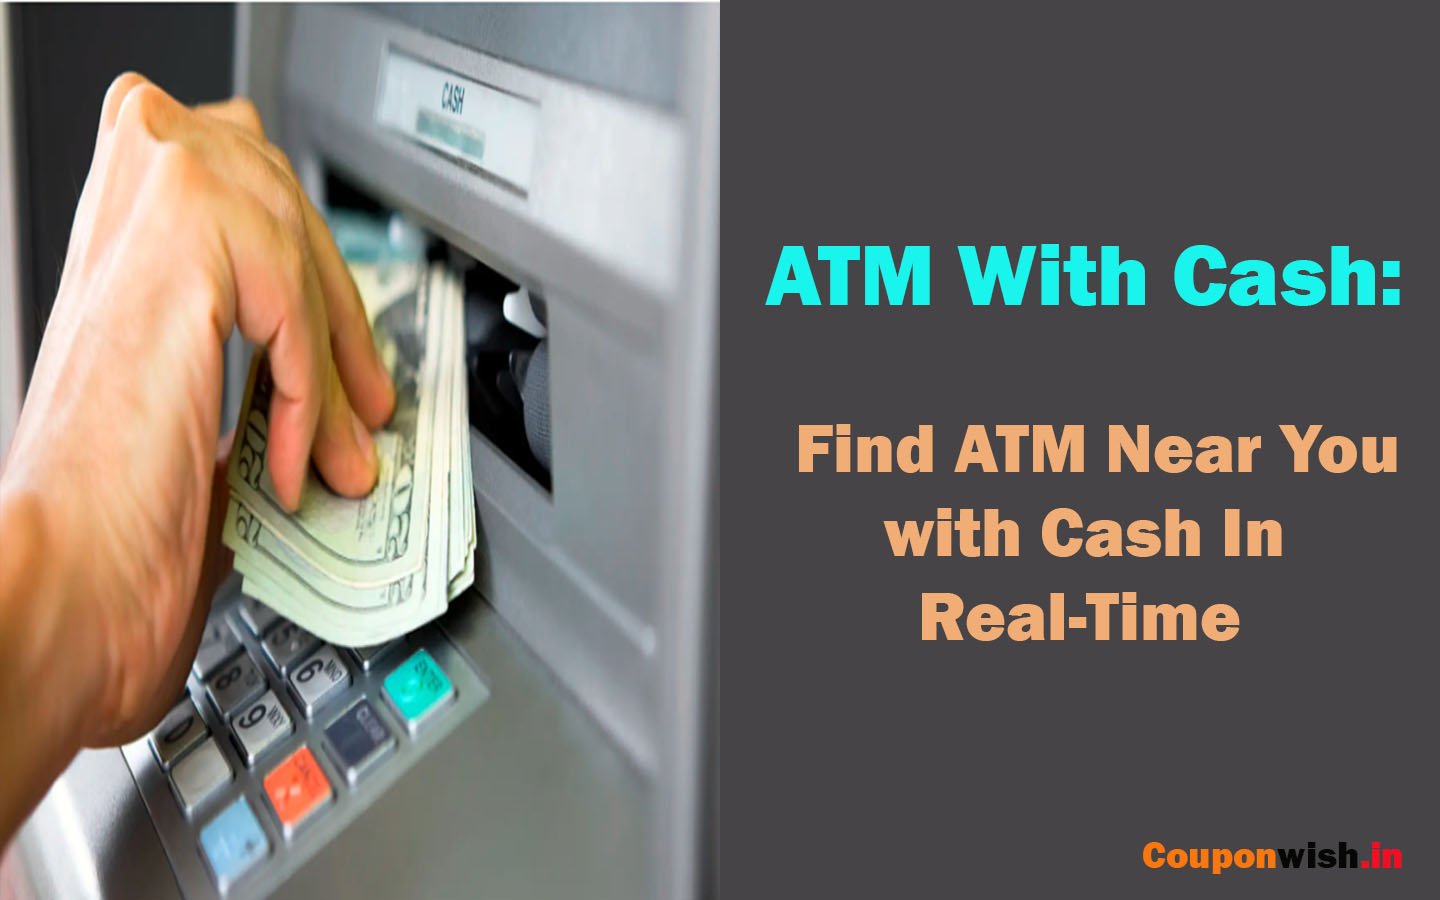 ATM With Cash: Find ATM Near You with Cash In Real-Time